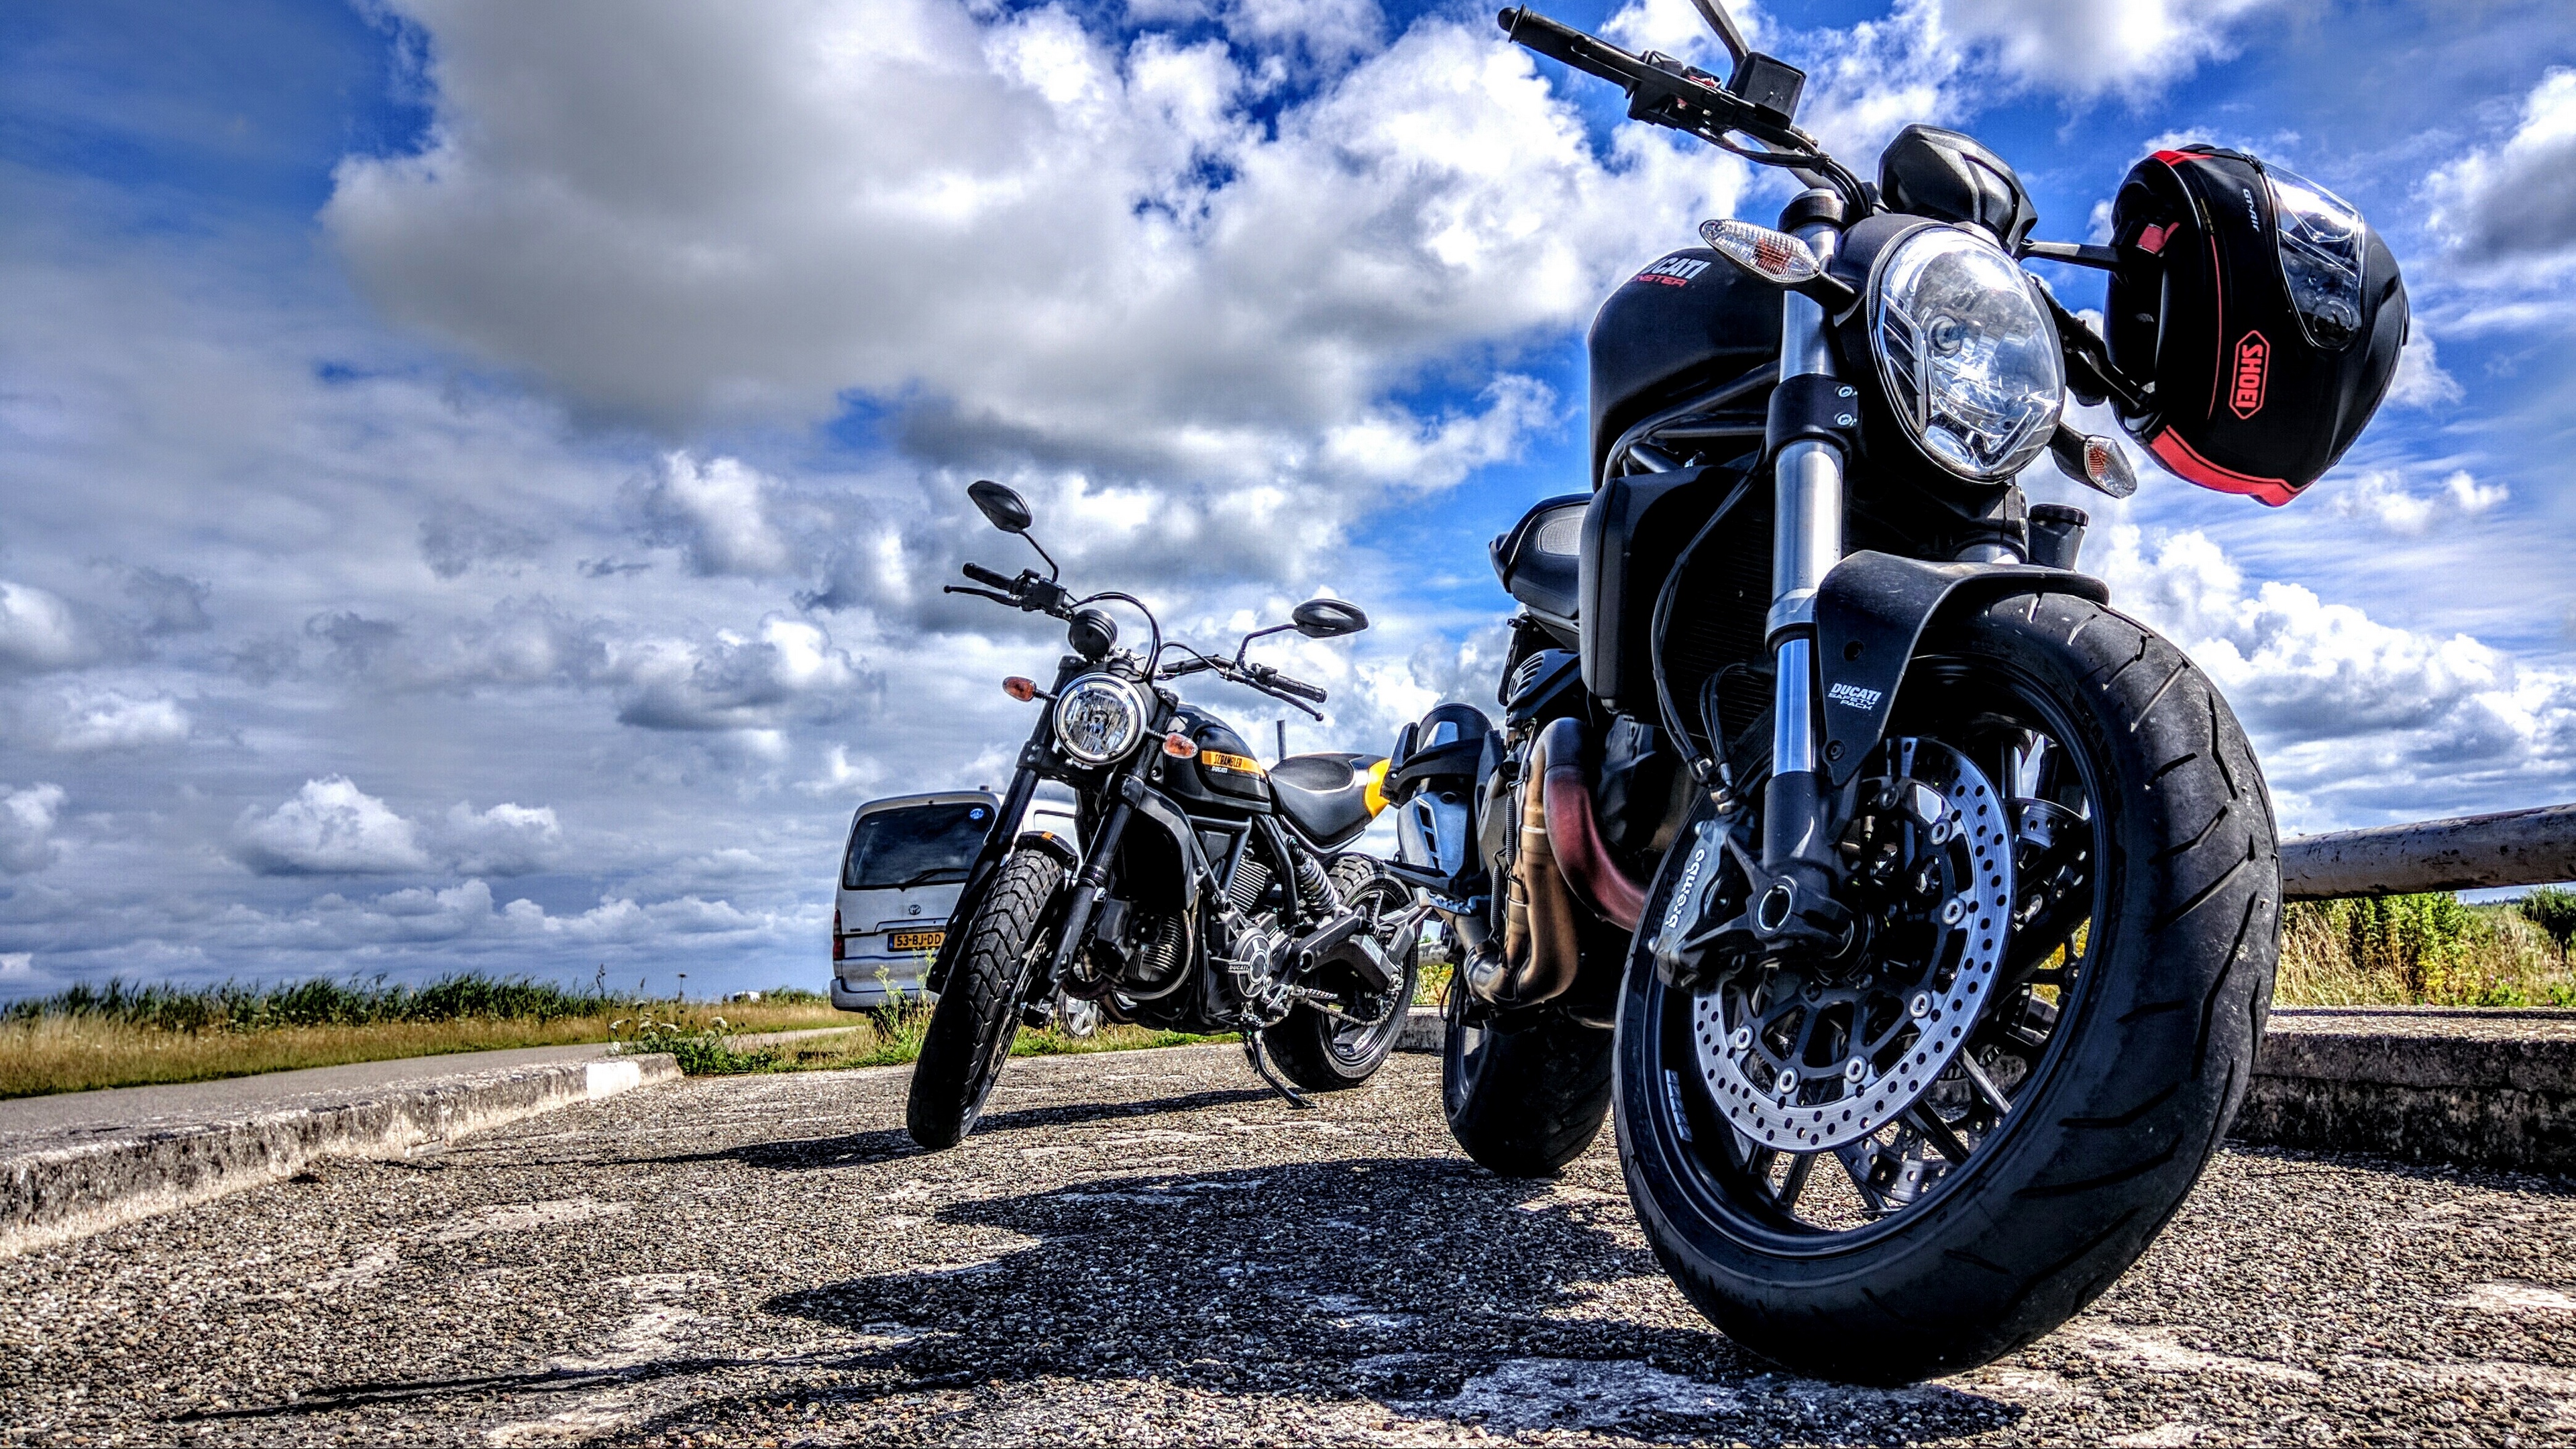 4K Motorcycle Wallpaper HDAmazoninAppstore for Android